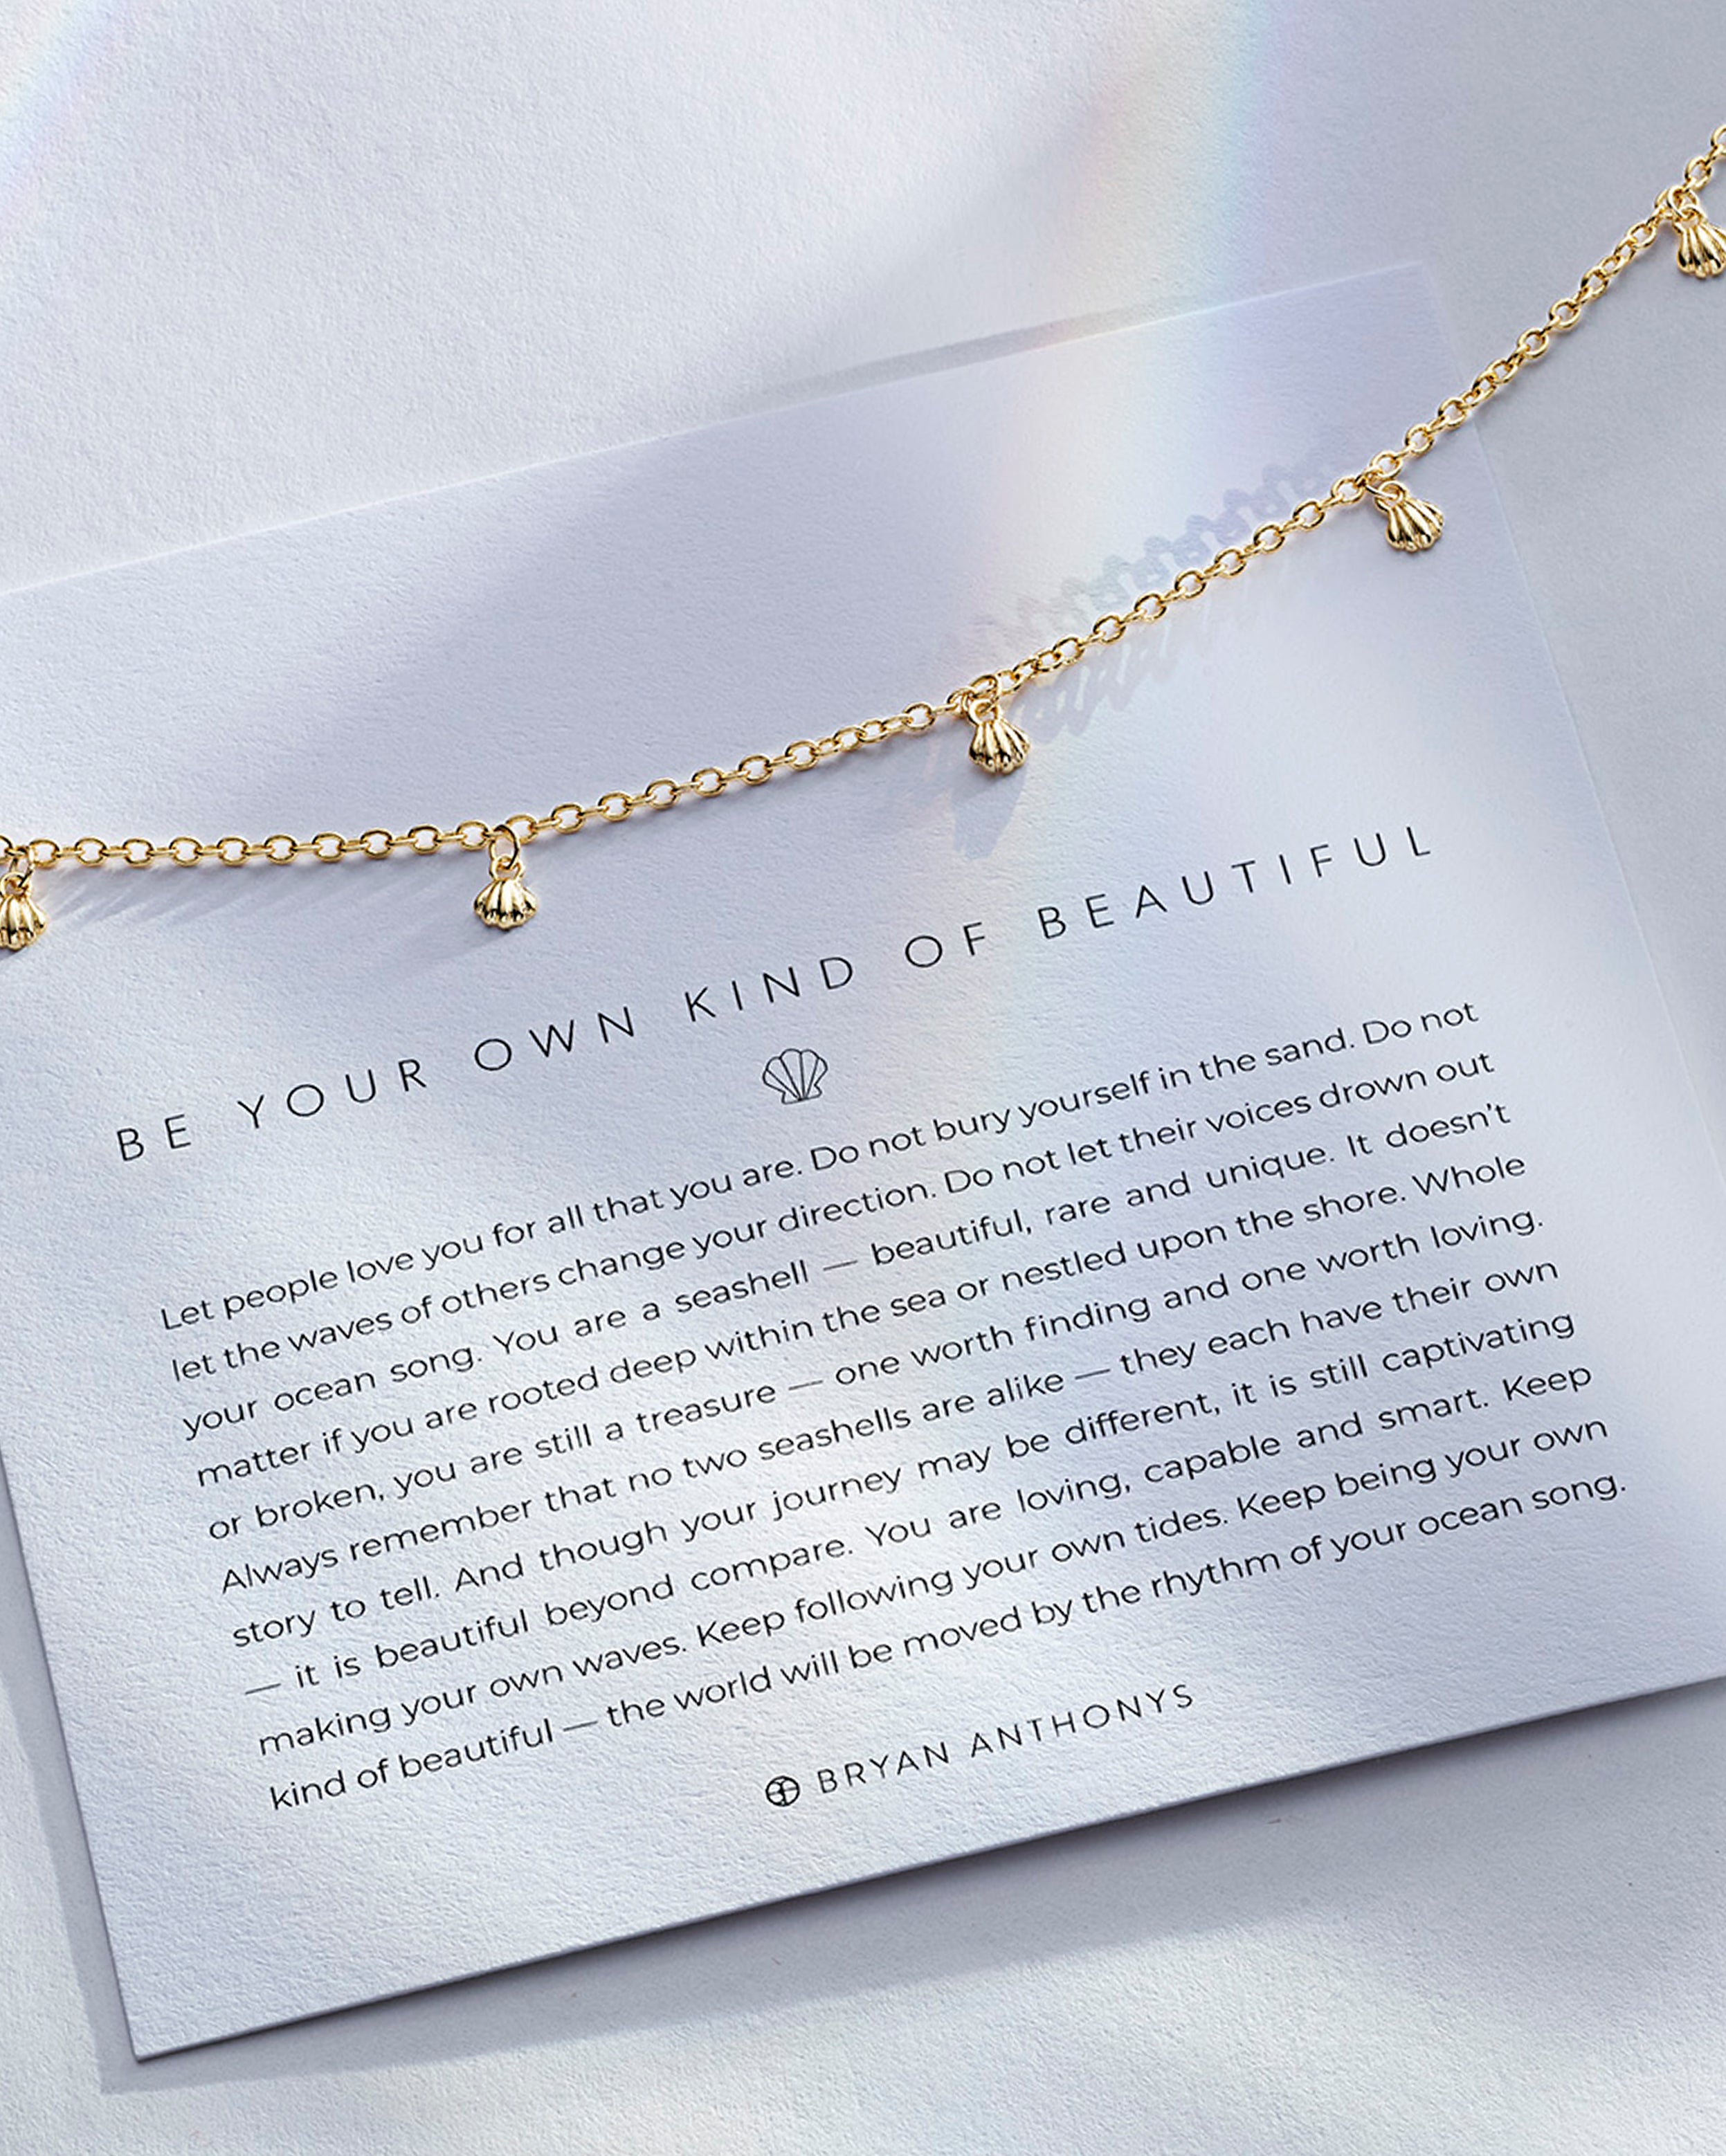 Be Your Own Kind Of Beautiful Necklace in 14k gold on card